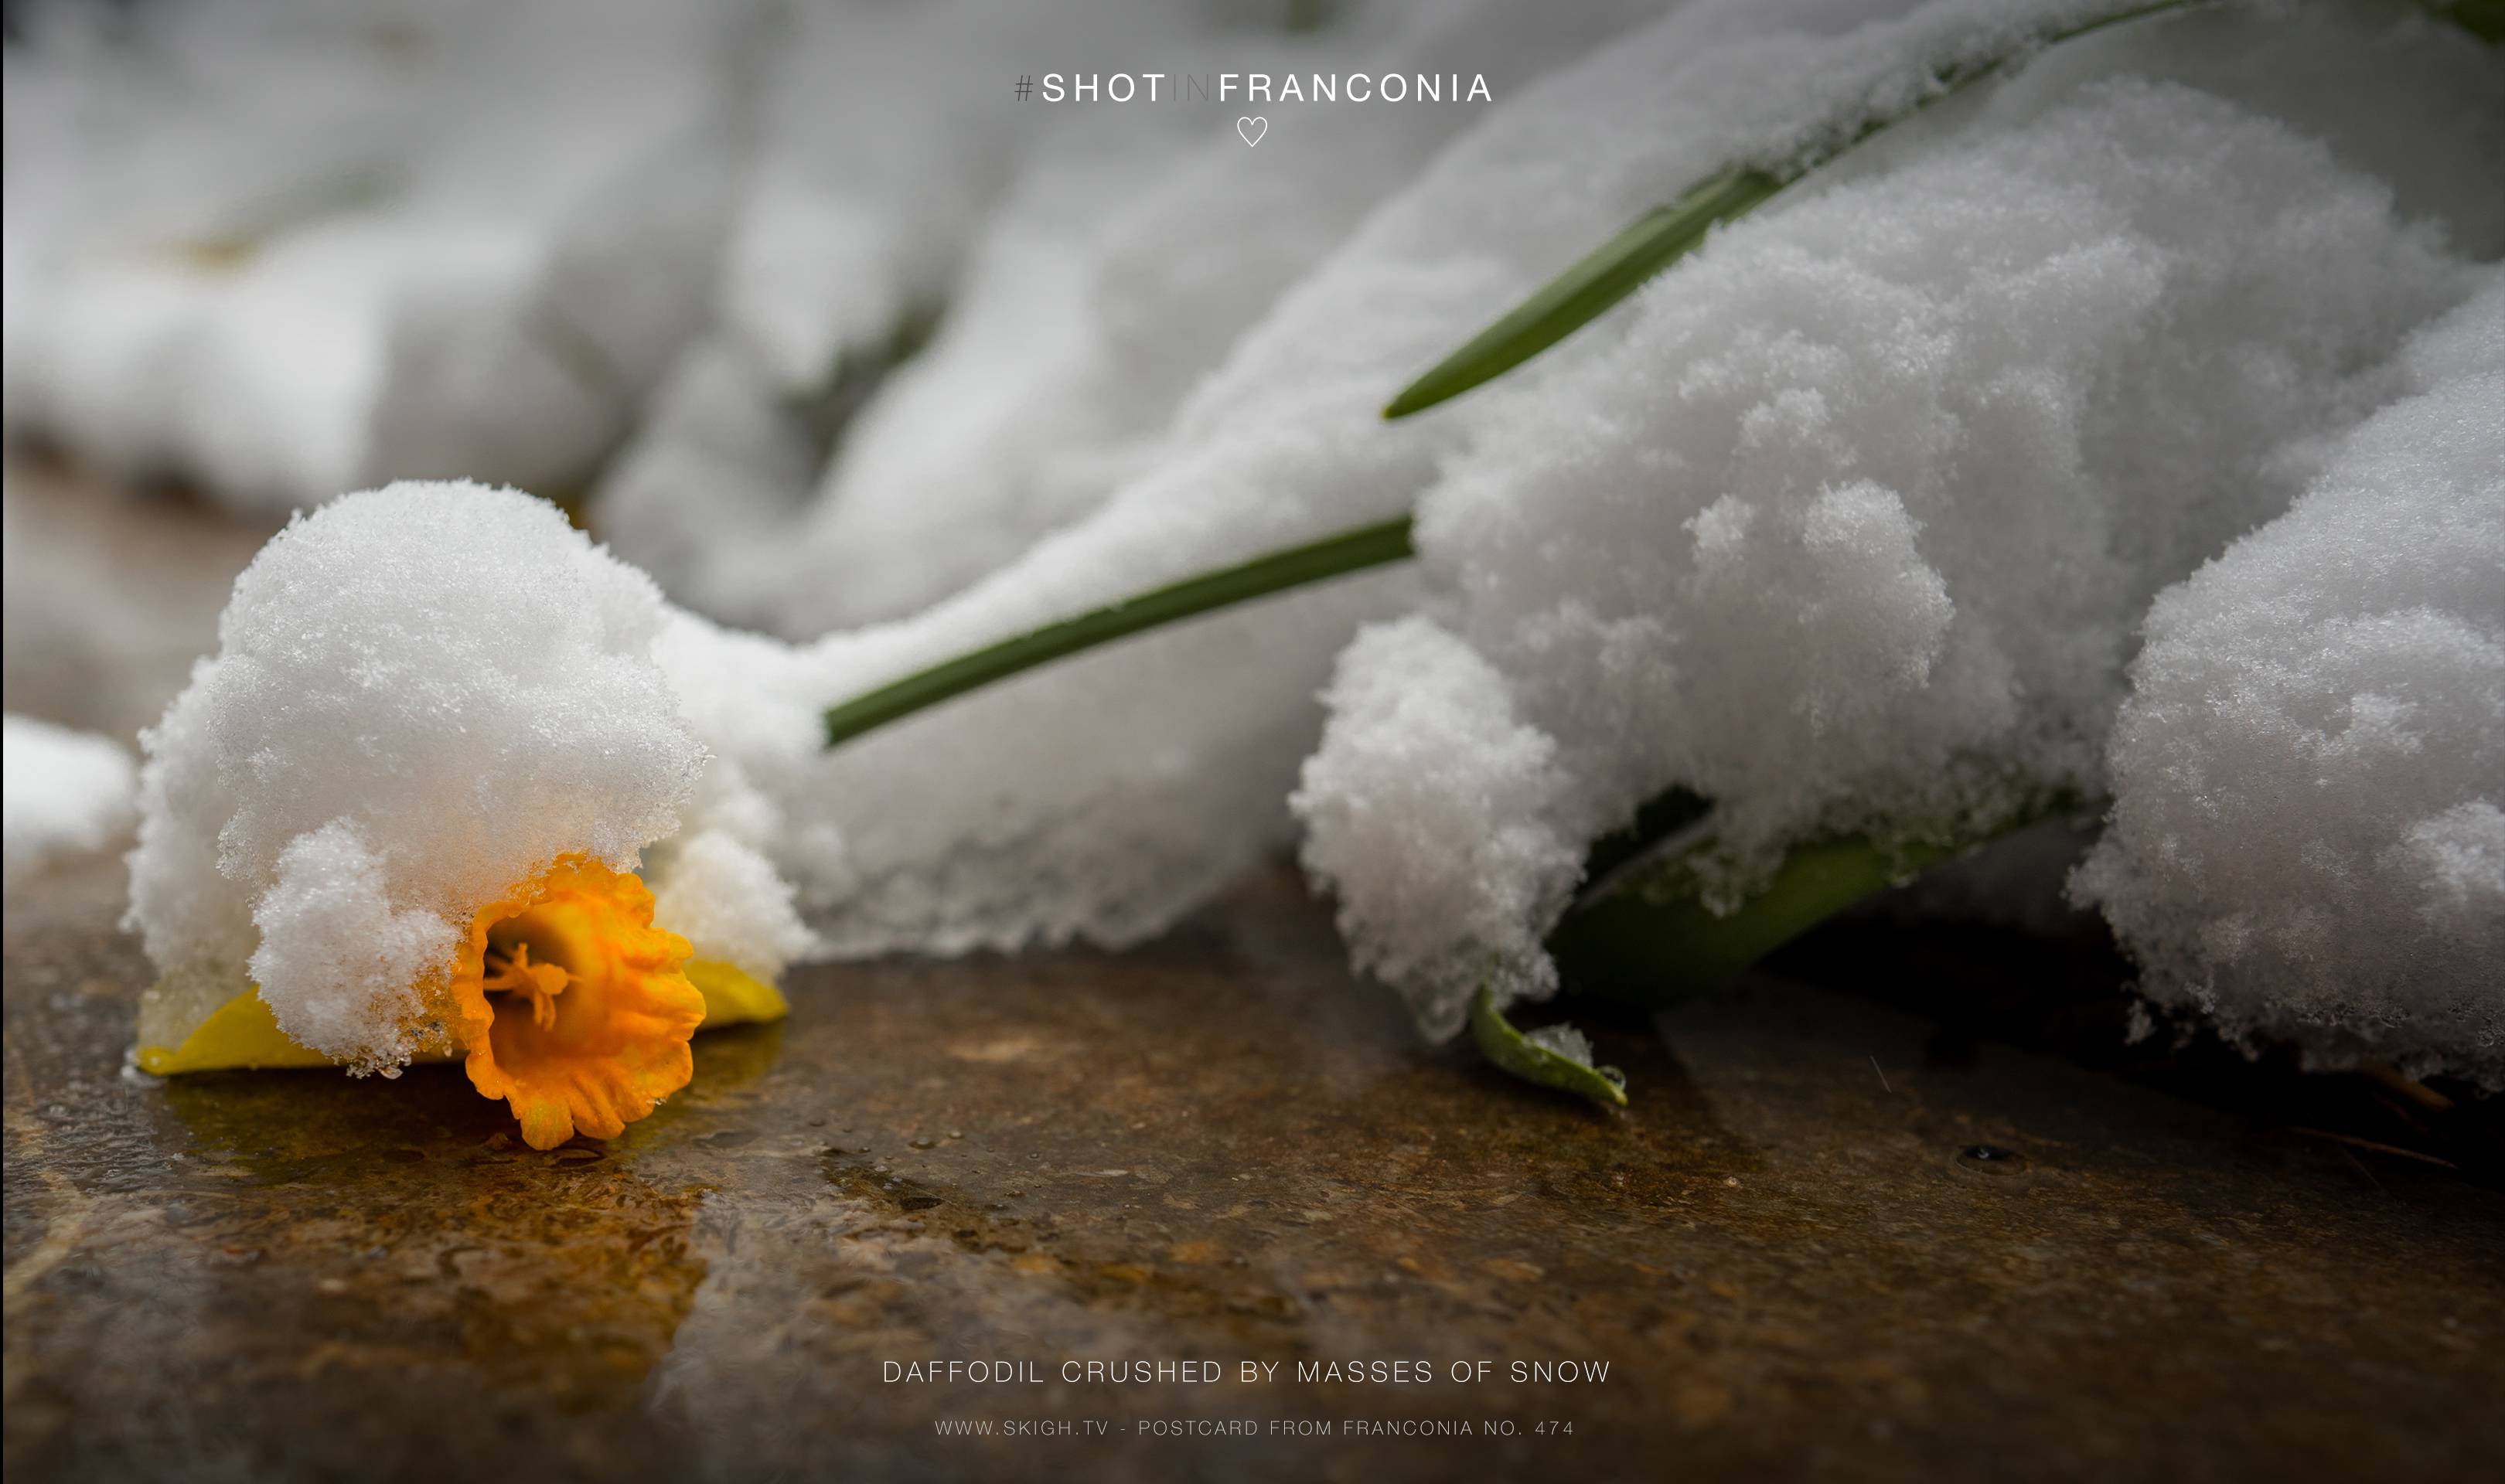 Daffodil crushed by masses of snow